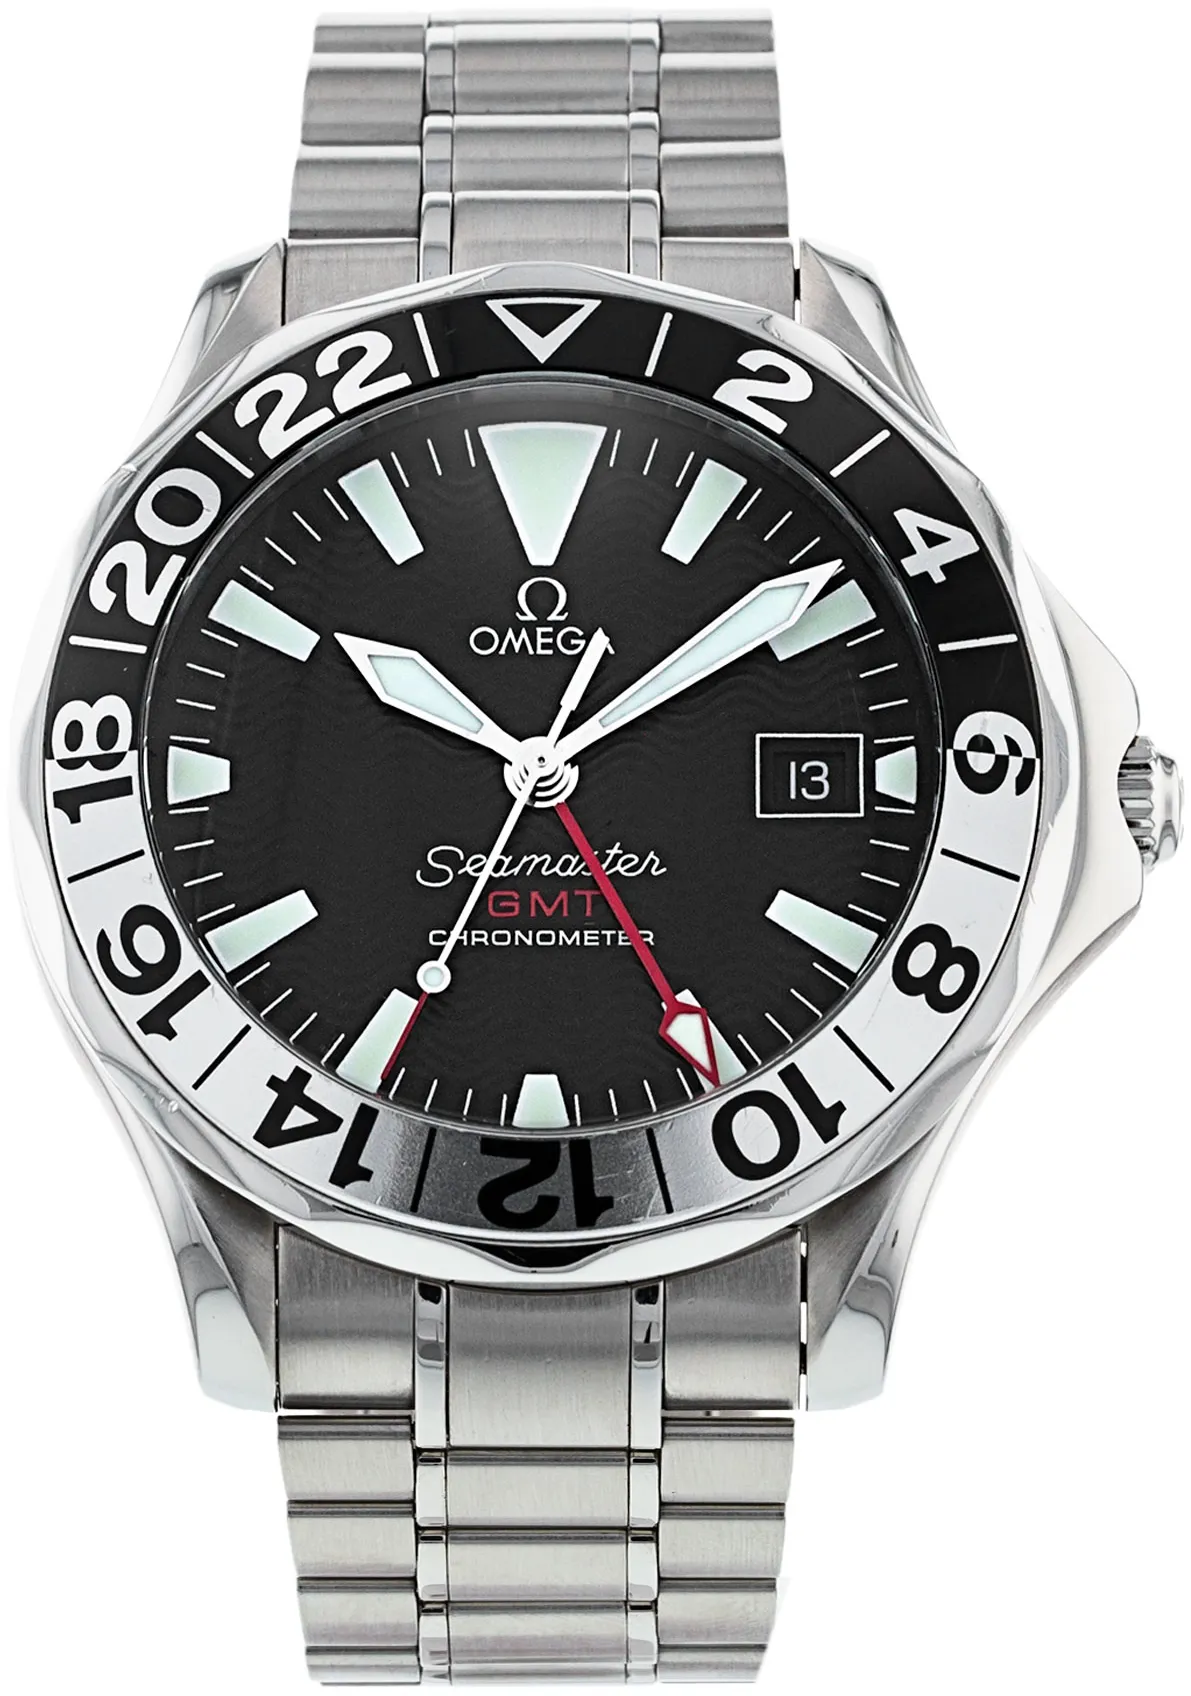 Omega Seamaster Diver 300M 22345000 41mm Stainless steel